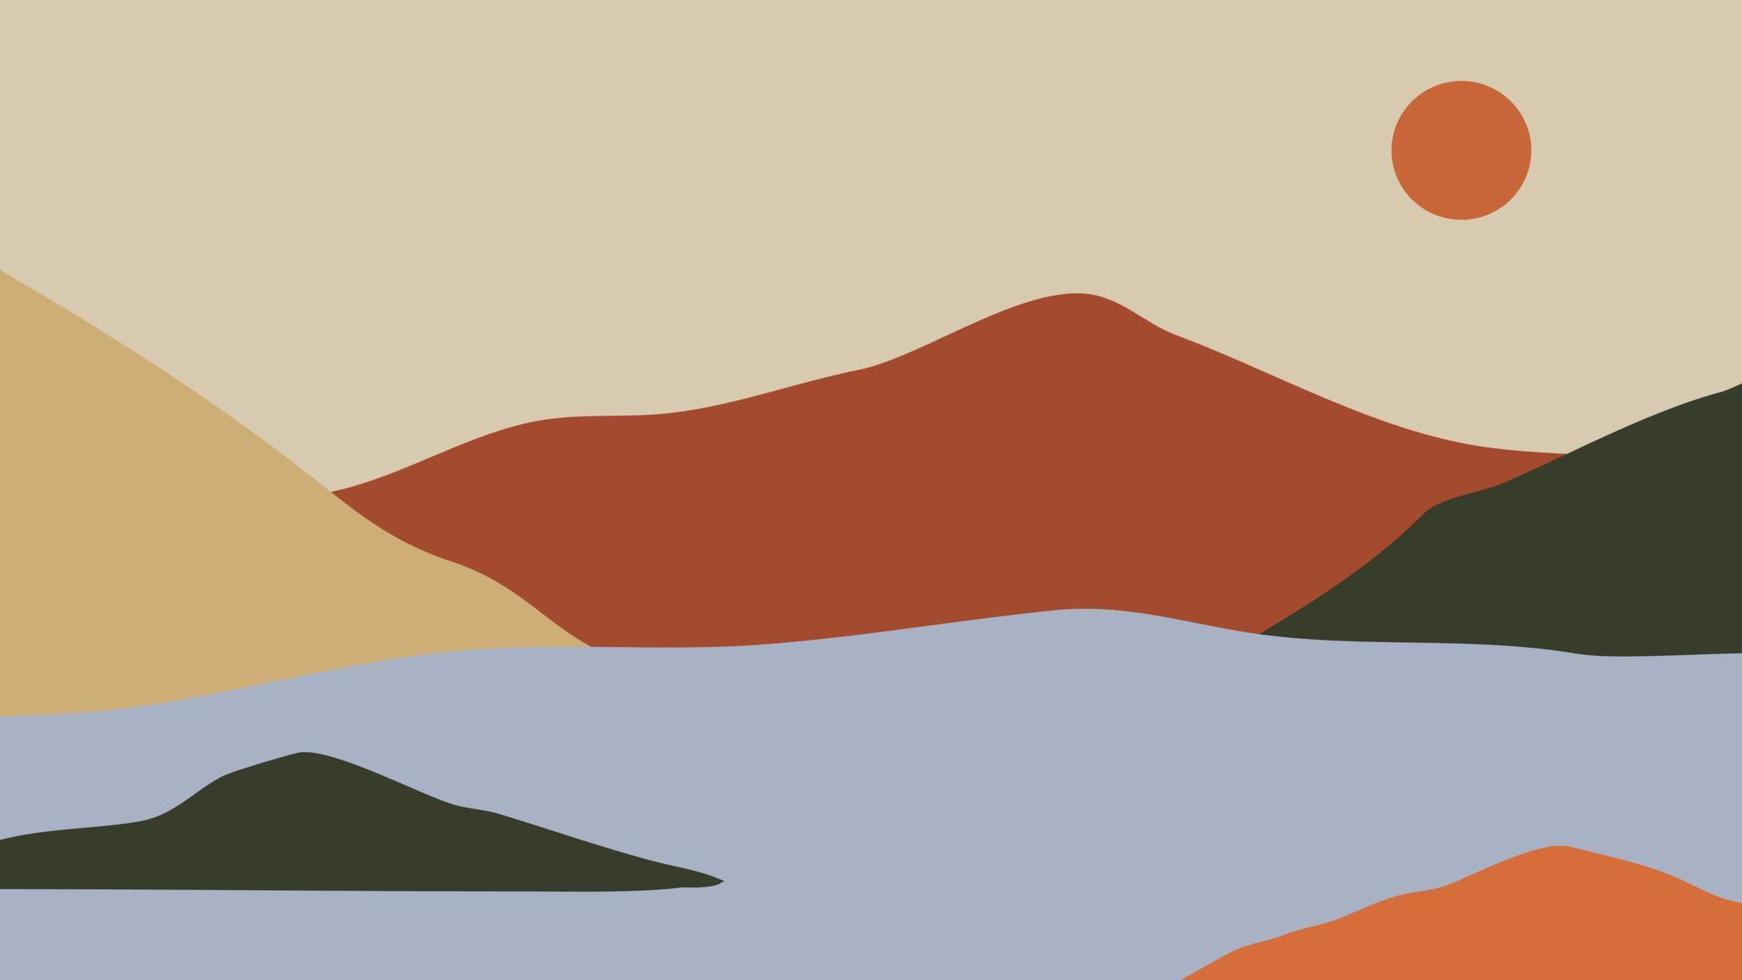 Hand drawn mountain with boho style color. Sunset mountain vector illustration with river. Mountain with boho style.